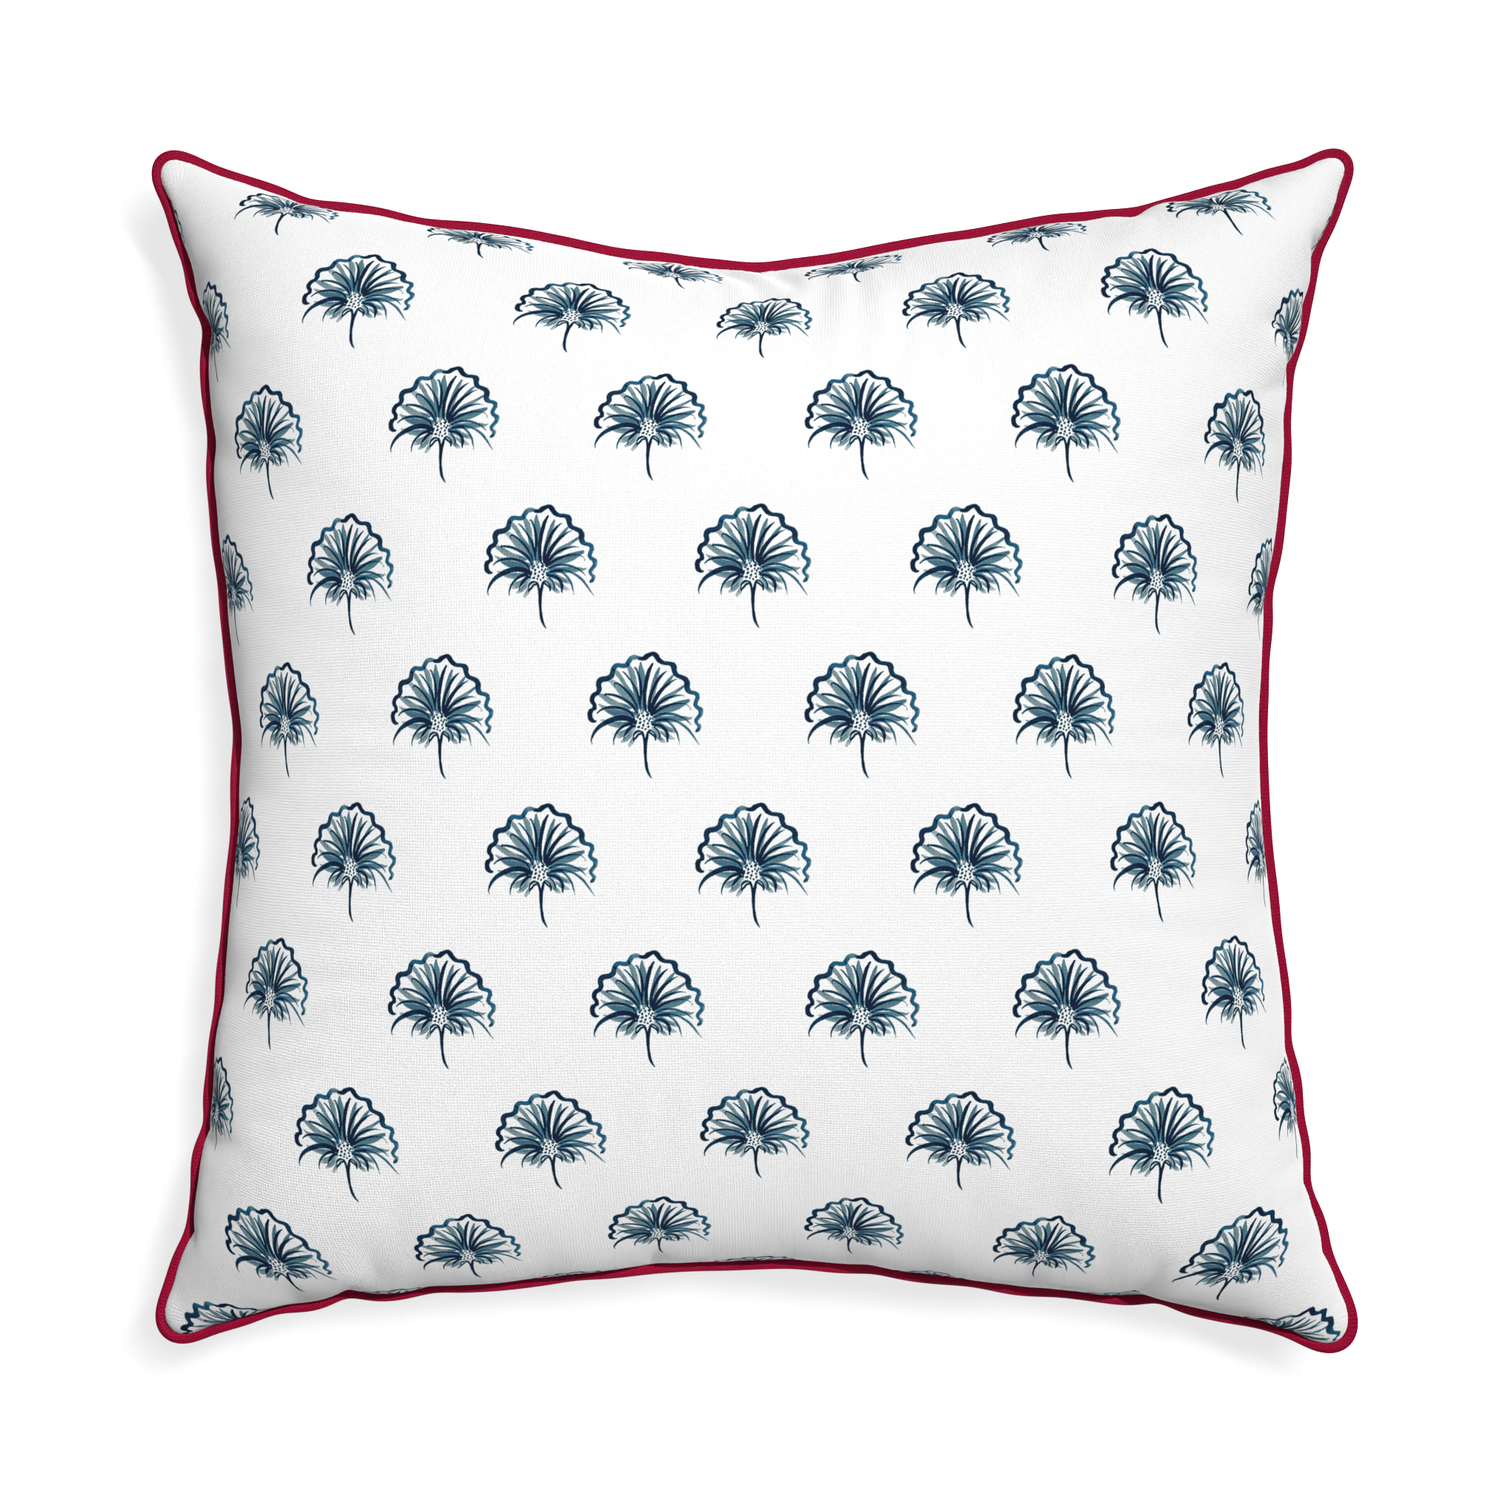 Euro-sham penelope midnight custom pillow with raspberry piping on white background